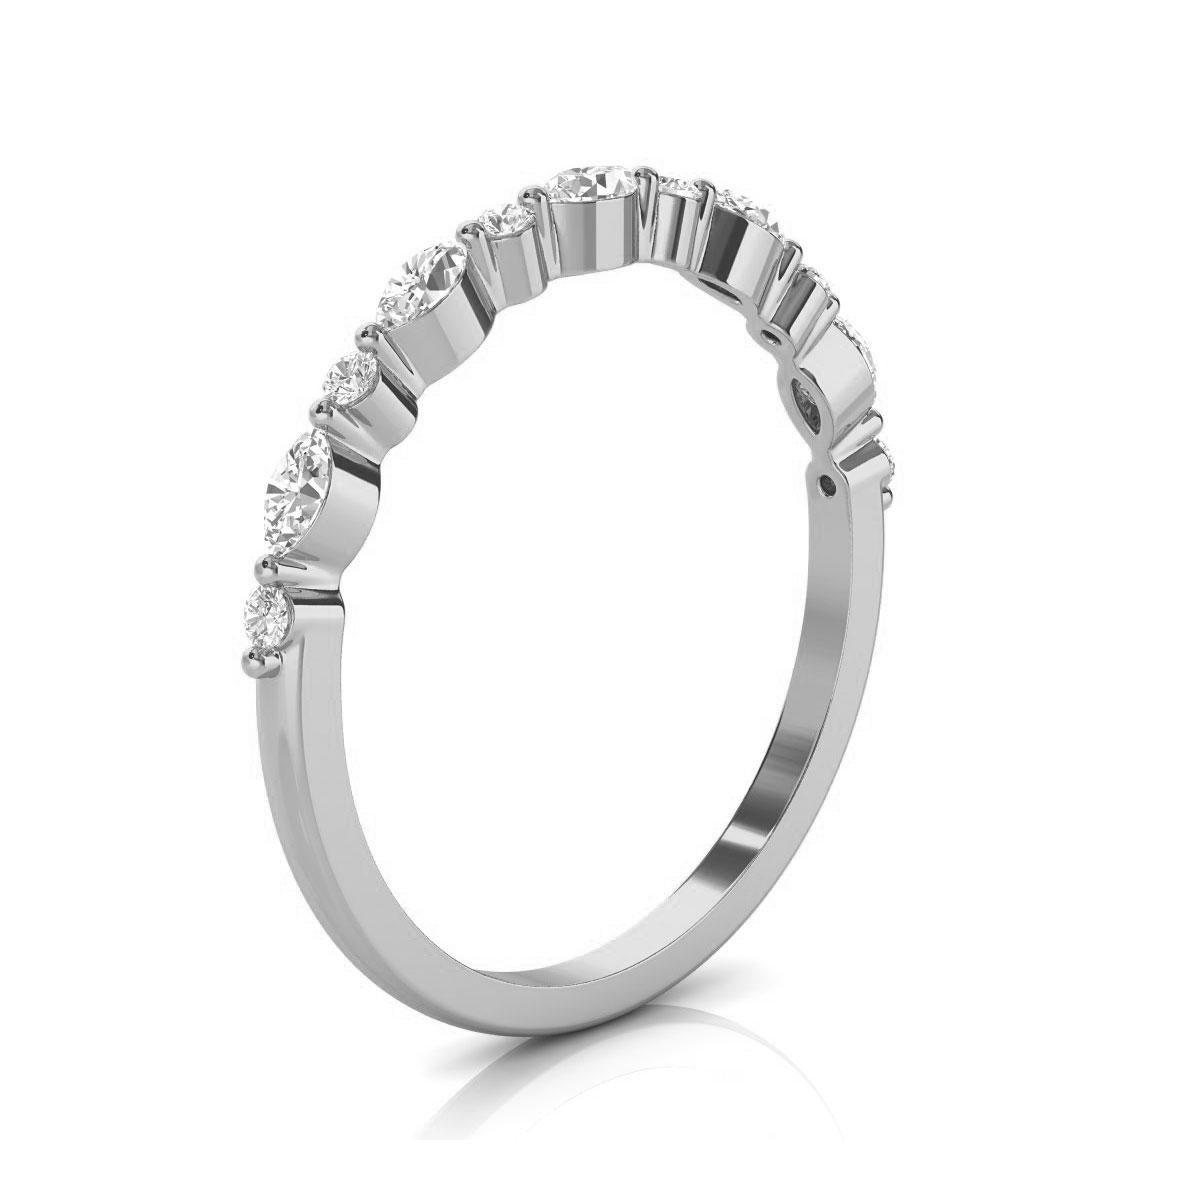 This minimalist ring features alternating round brilliant and marquise shape diamonds prong set on thin metal. It's stackable, and our customers love it! Experience the difference in person!

Product details: 

Center Gemstone Color: WHITE
Side